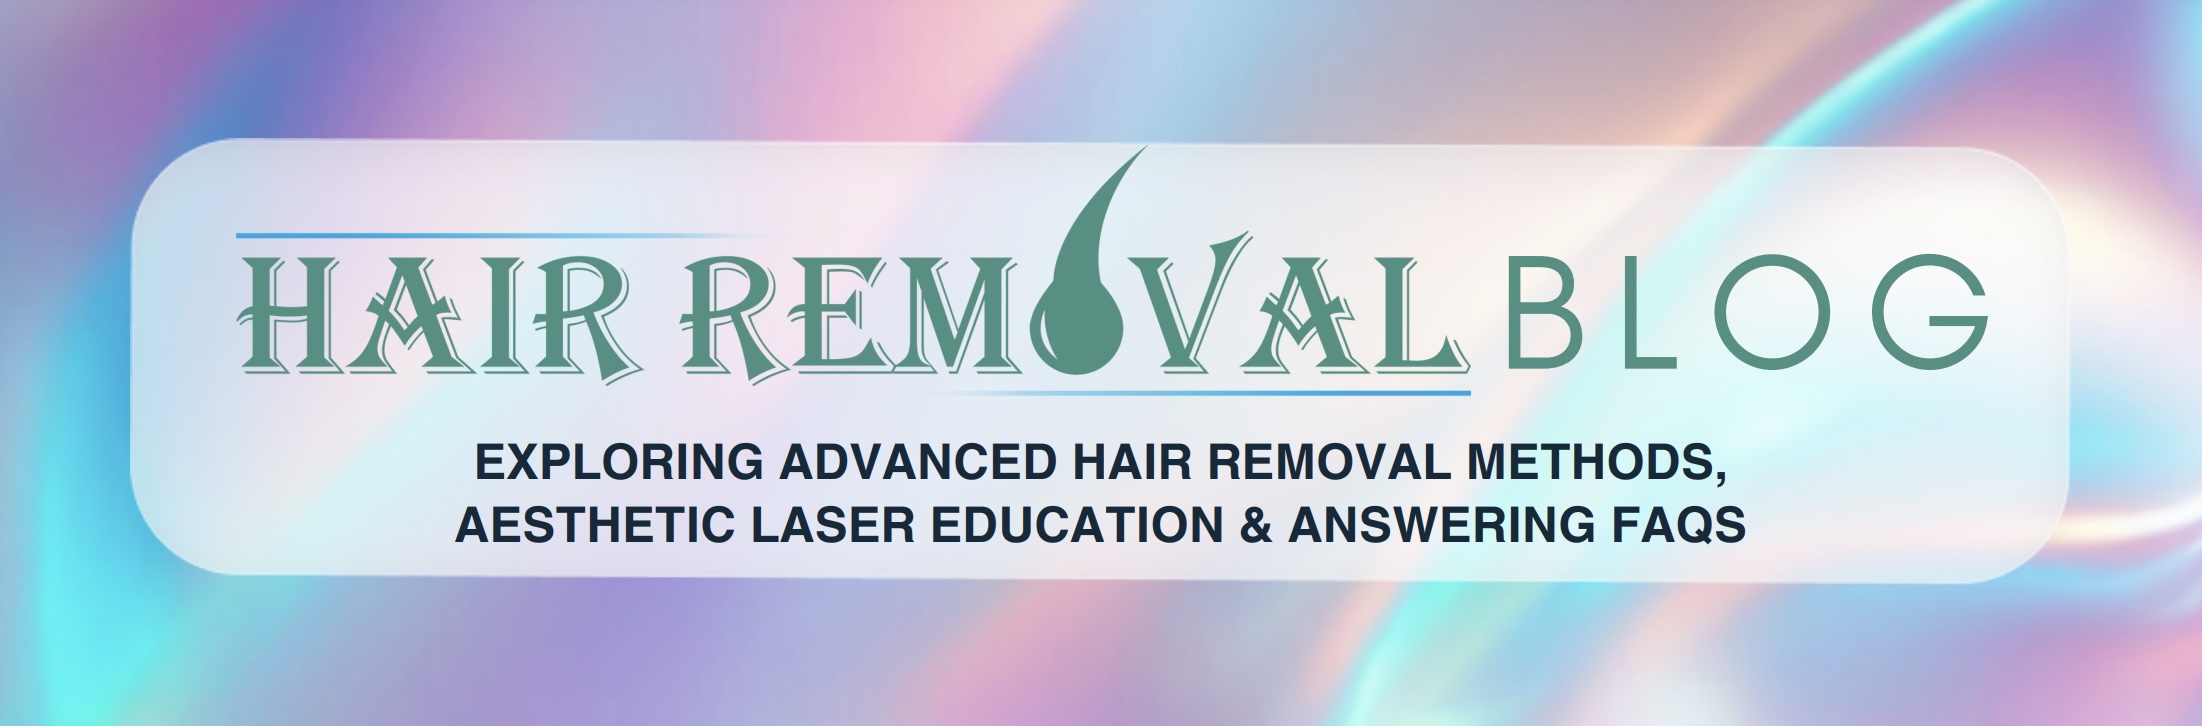 national hair removal day blog explores advanced hair removal methods aesthetic laser education and answers frequently asked questions about hair removal